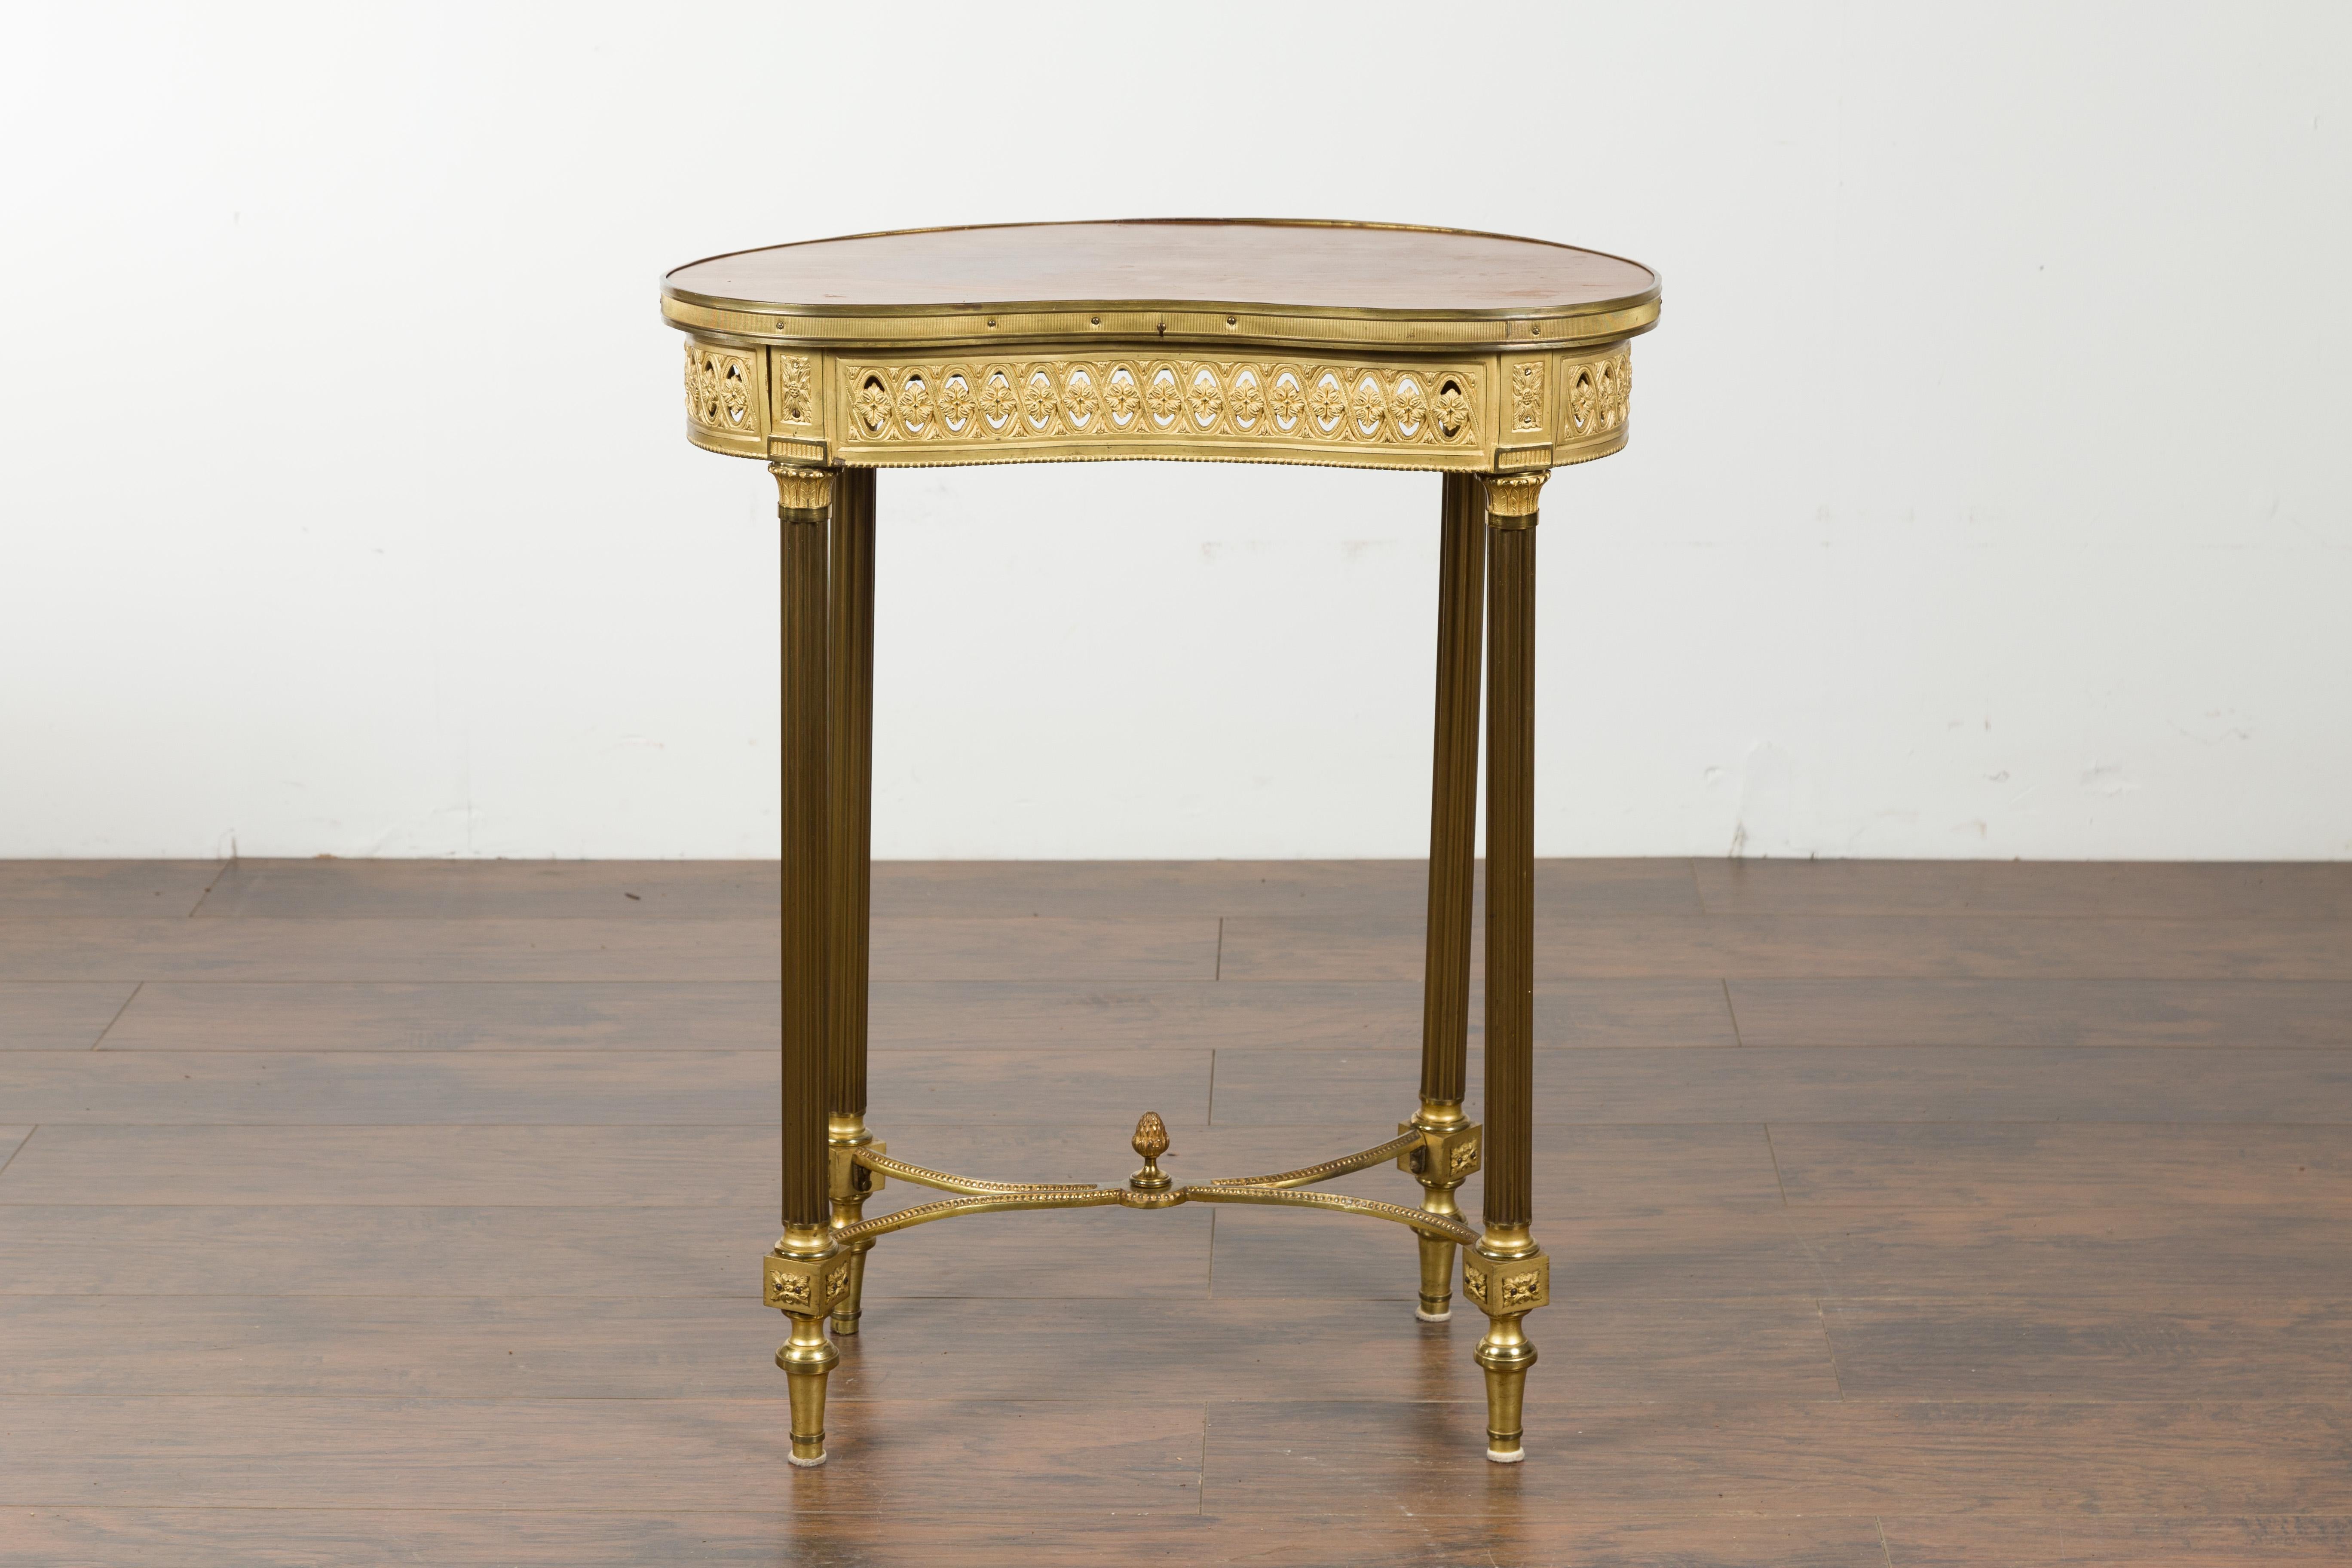 19th Century French Louis XVI Style Kidney Gilt Bronze Accent Table with Palmiform Columns